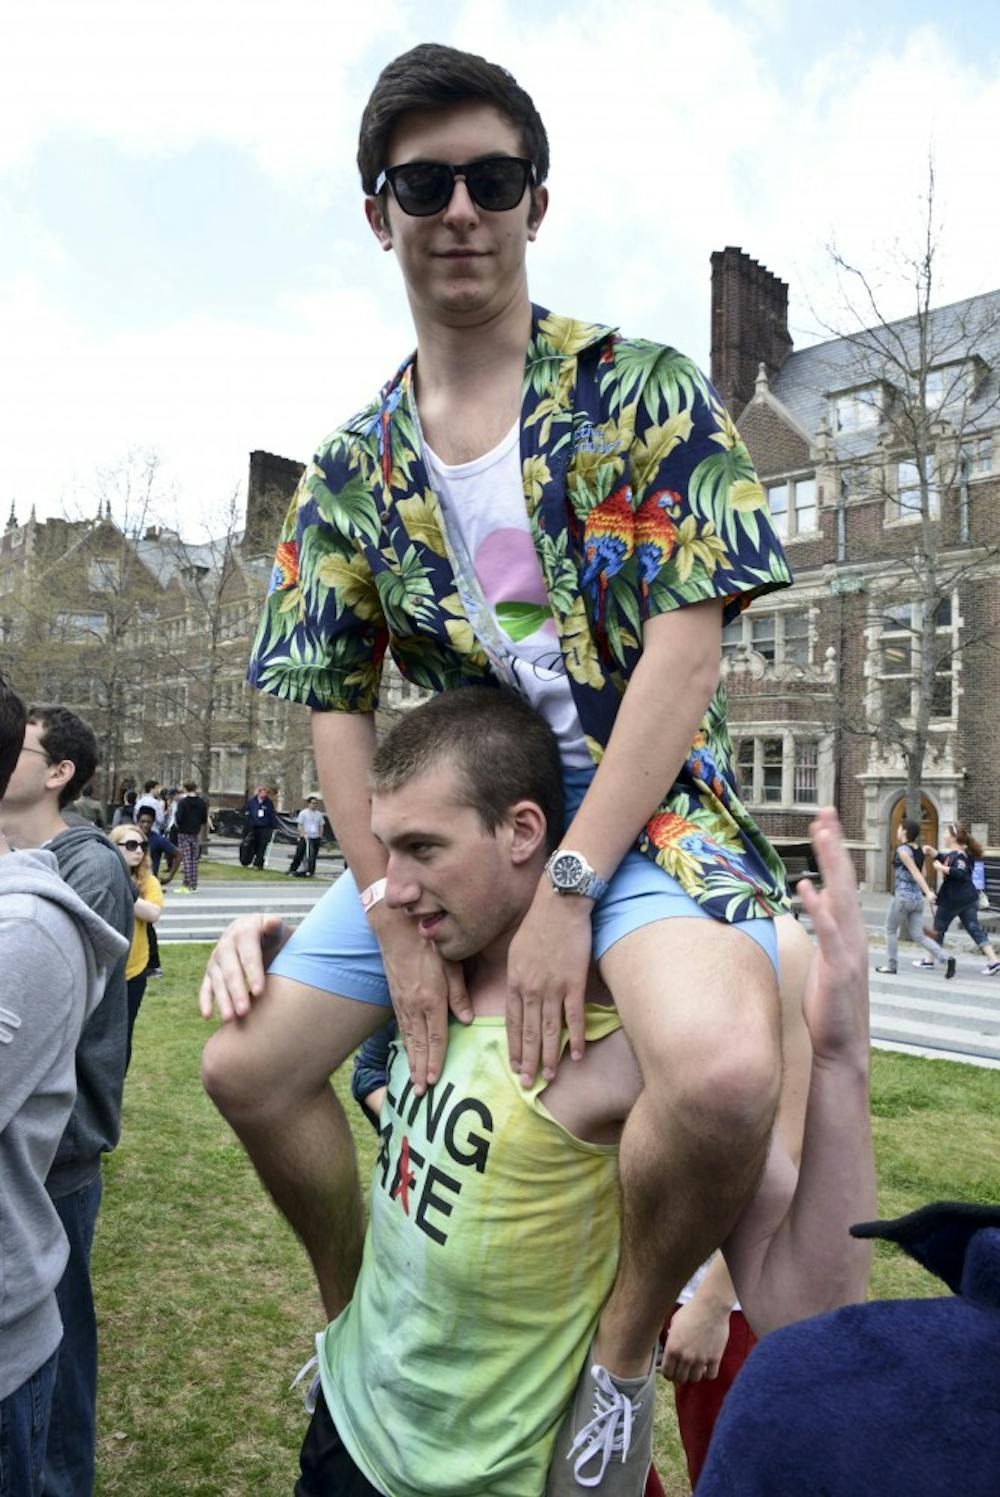 Images for the Photo Essay.

During Fling, two ideas crystallized for potential photo essays:  1) Portraits of fling shirts that highlight the many student organizations around campus.  2)  Capturing intimate moments of people embracing.